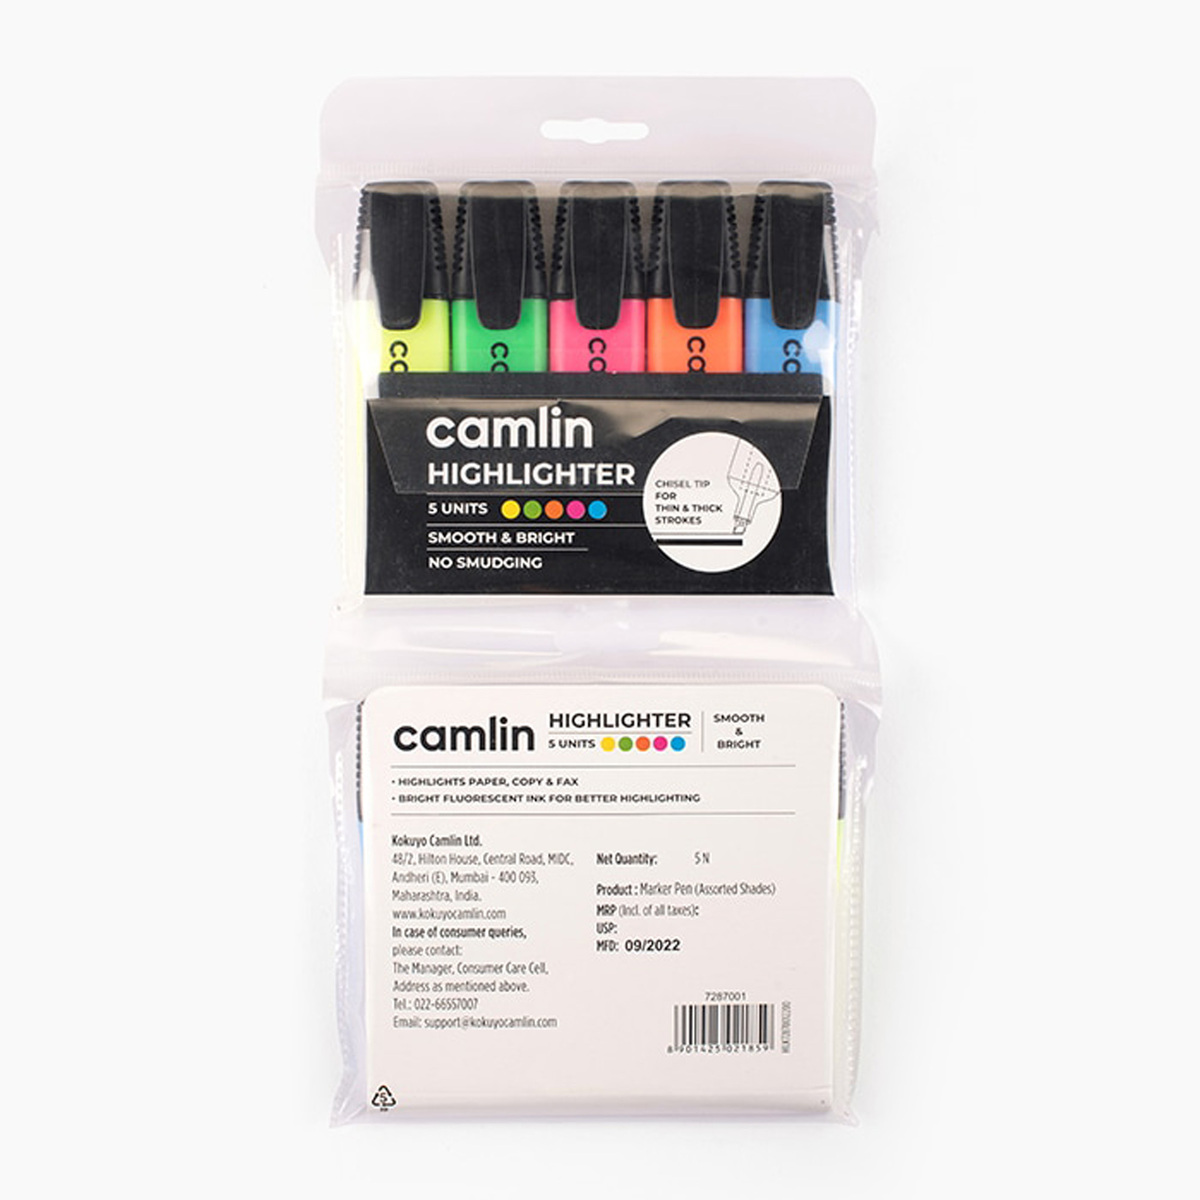 Camlin Highlighter Assorted pouch of 5 shades 7287001